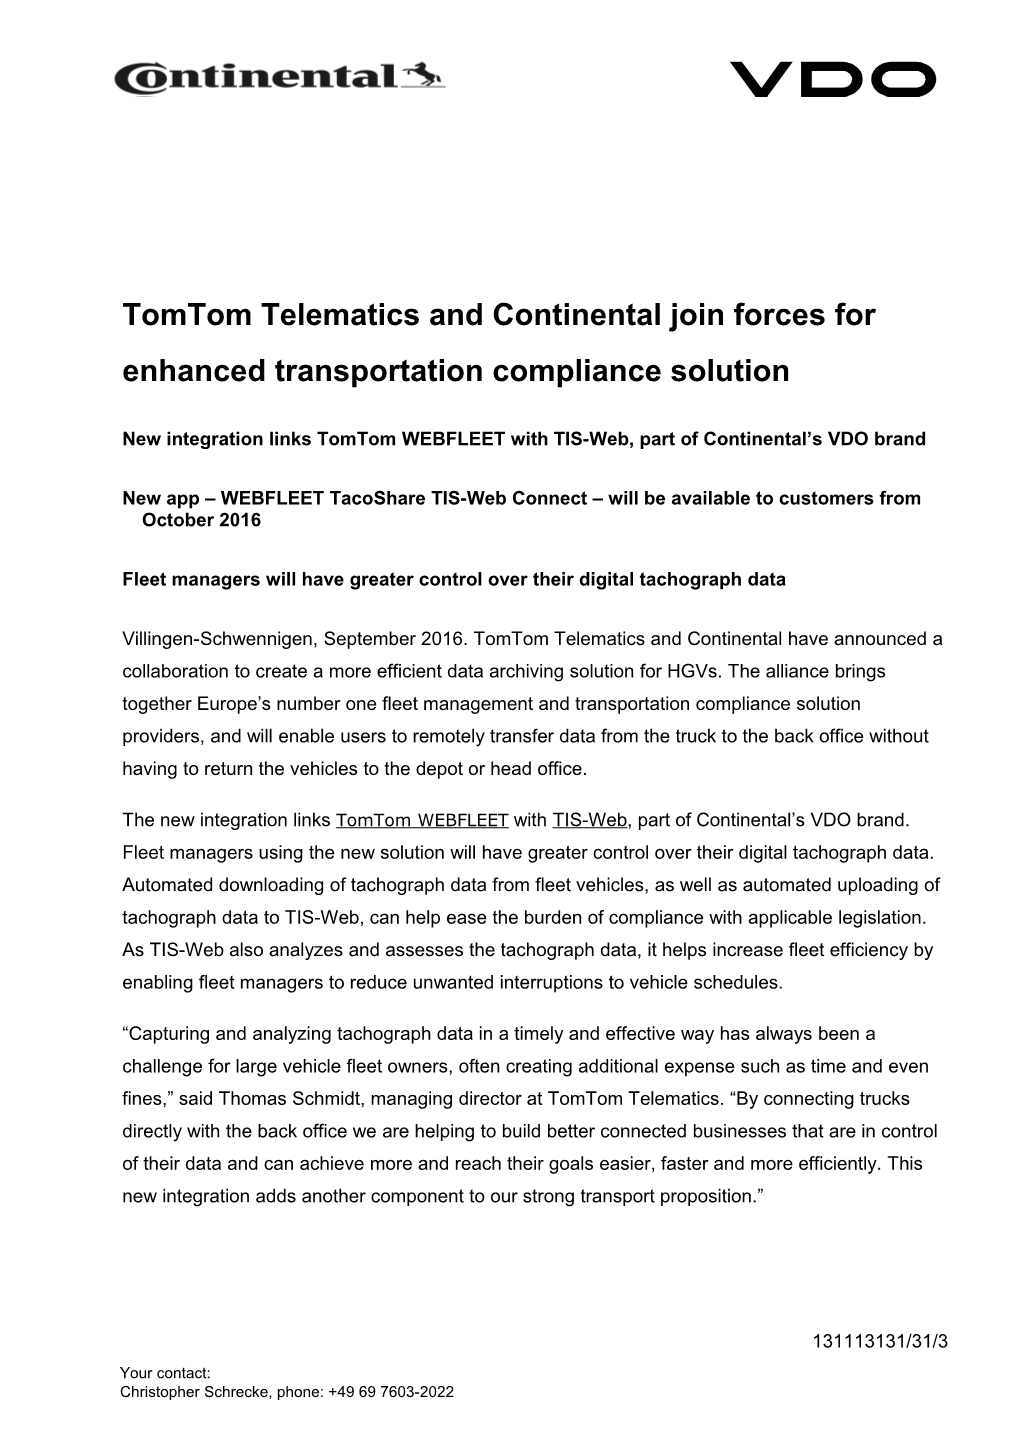 Tomtom Telematics and Continental Join Forces for Enhanced Transportation Compliance Solution